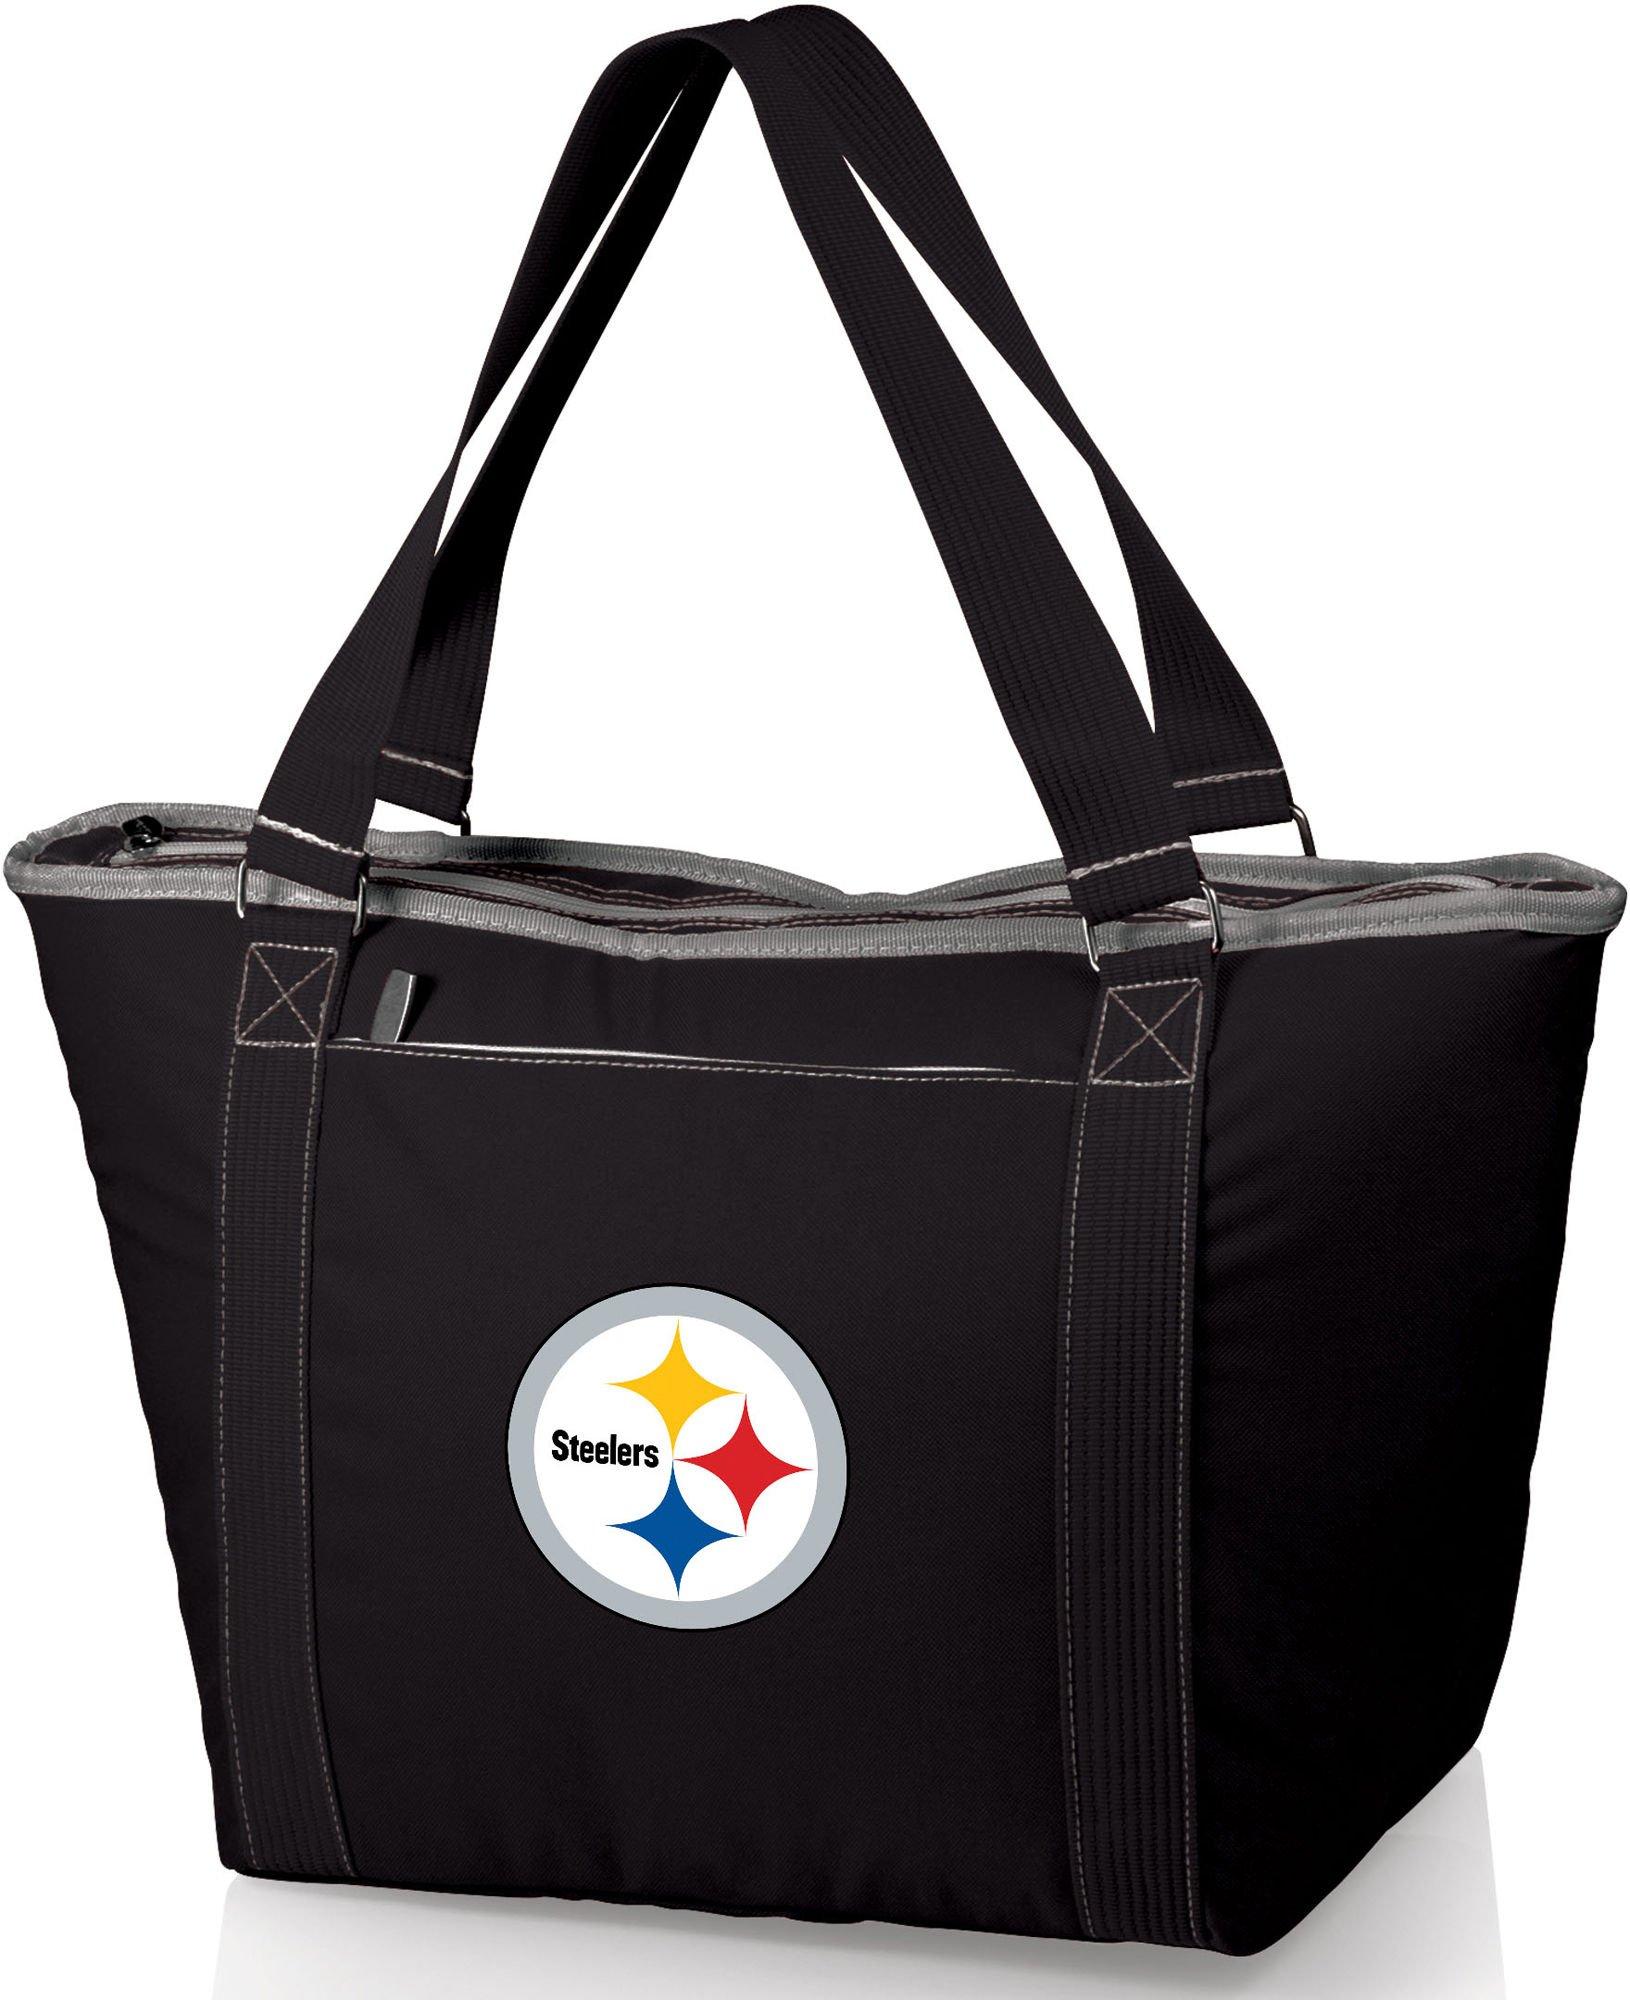 Pittsburgh Steelers Topanga Cooler by Picnic Time